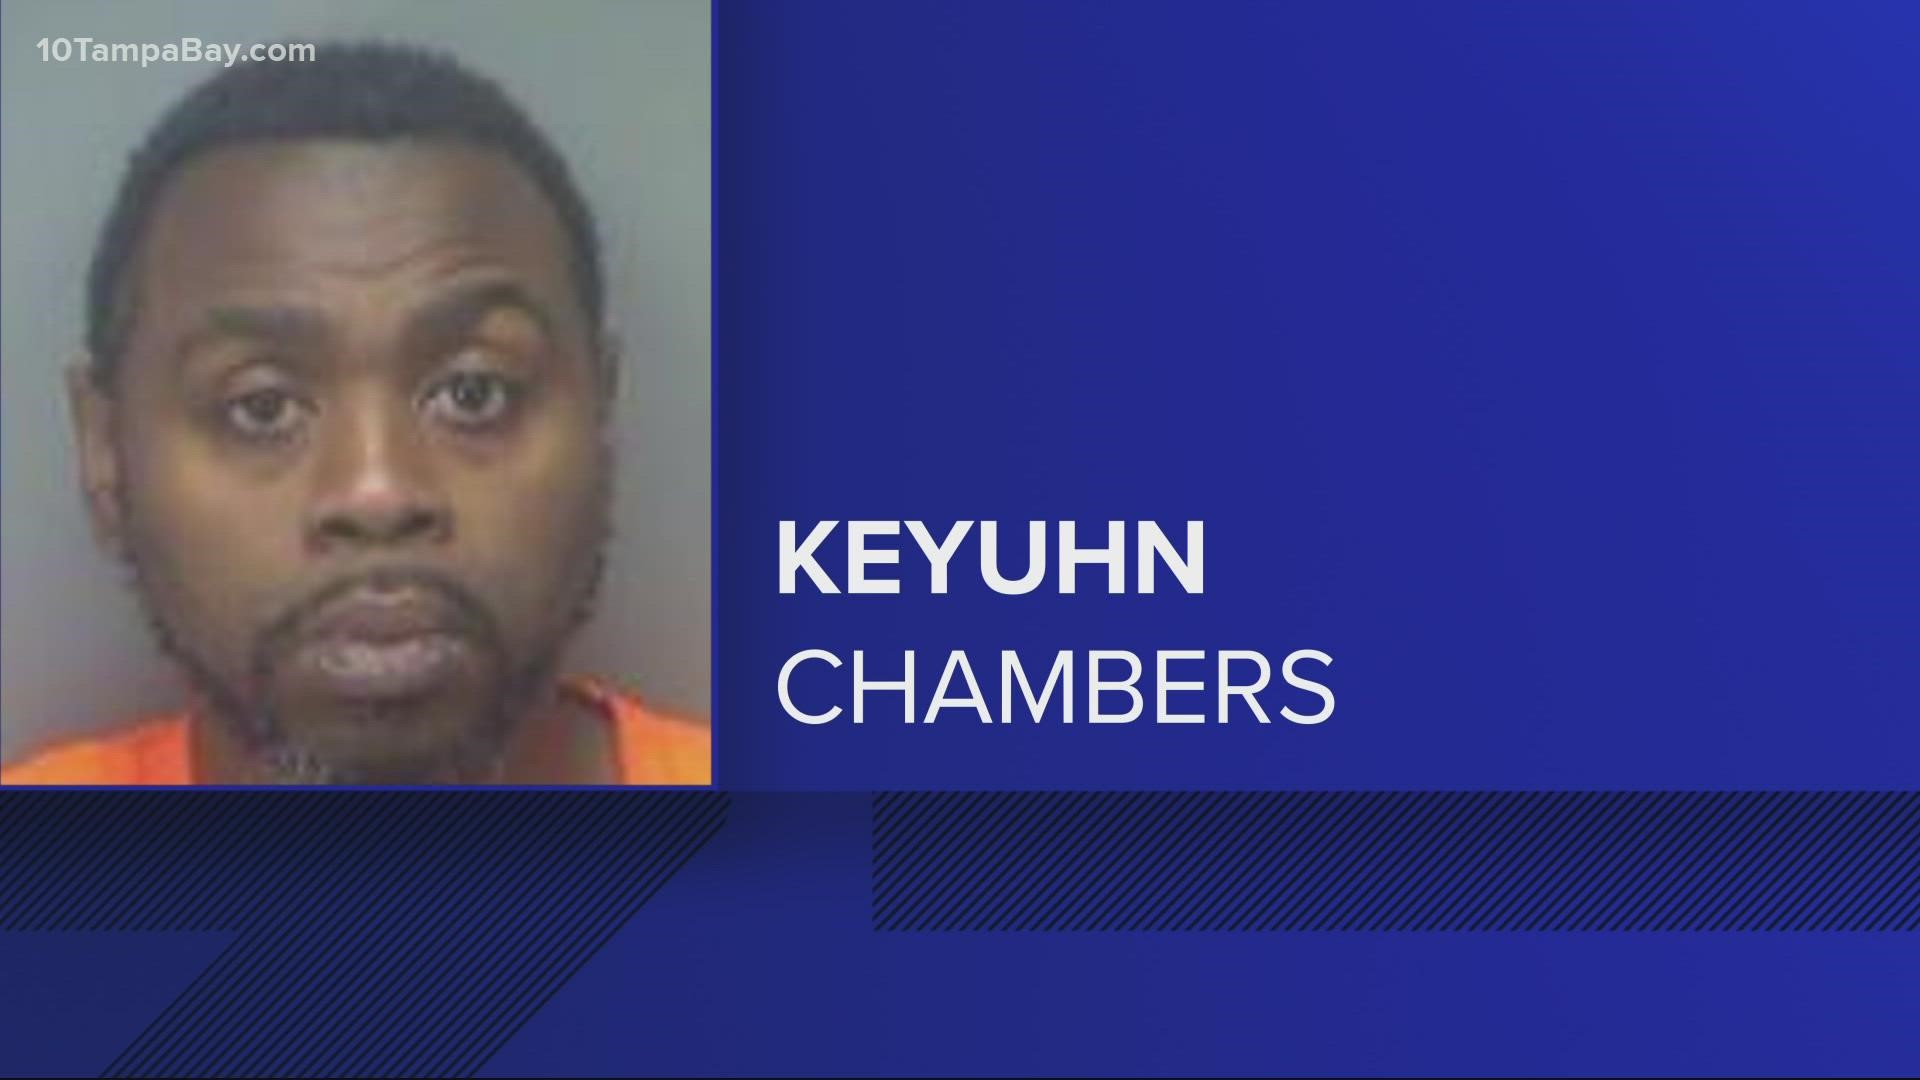 Pinellas Park Police say Keyuhn Chambers has been arrested after a woman was found with multiple stab wounds. The woman later died of her injuries.